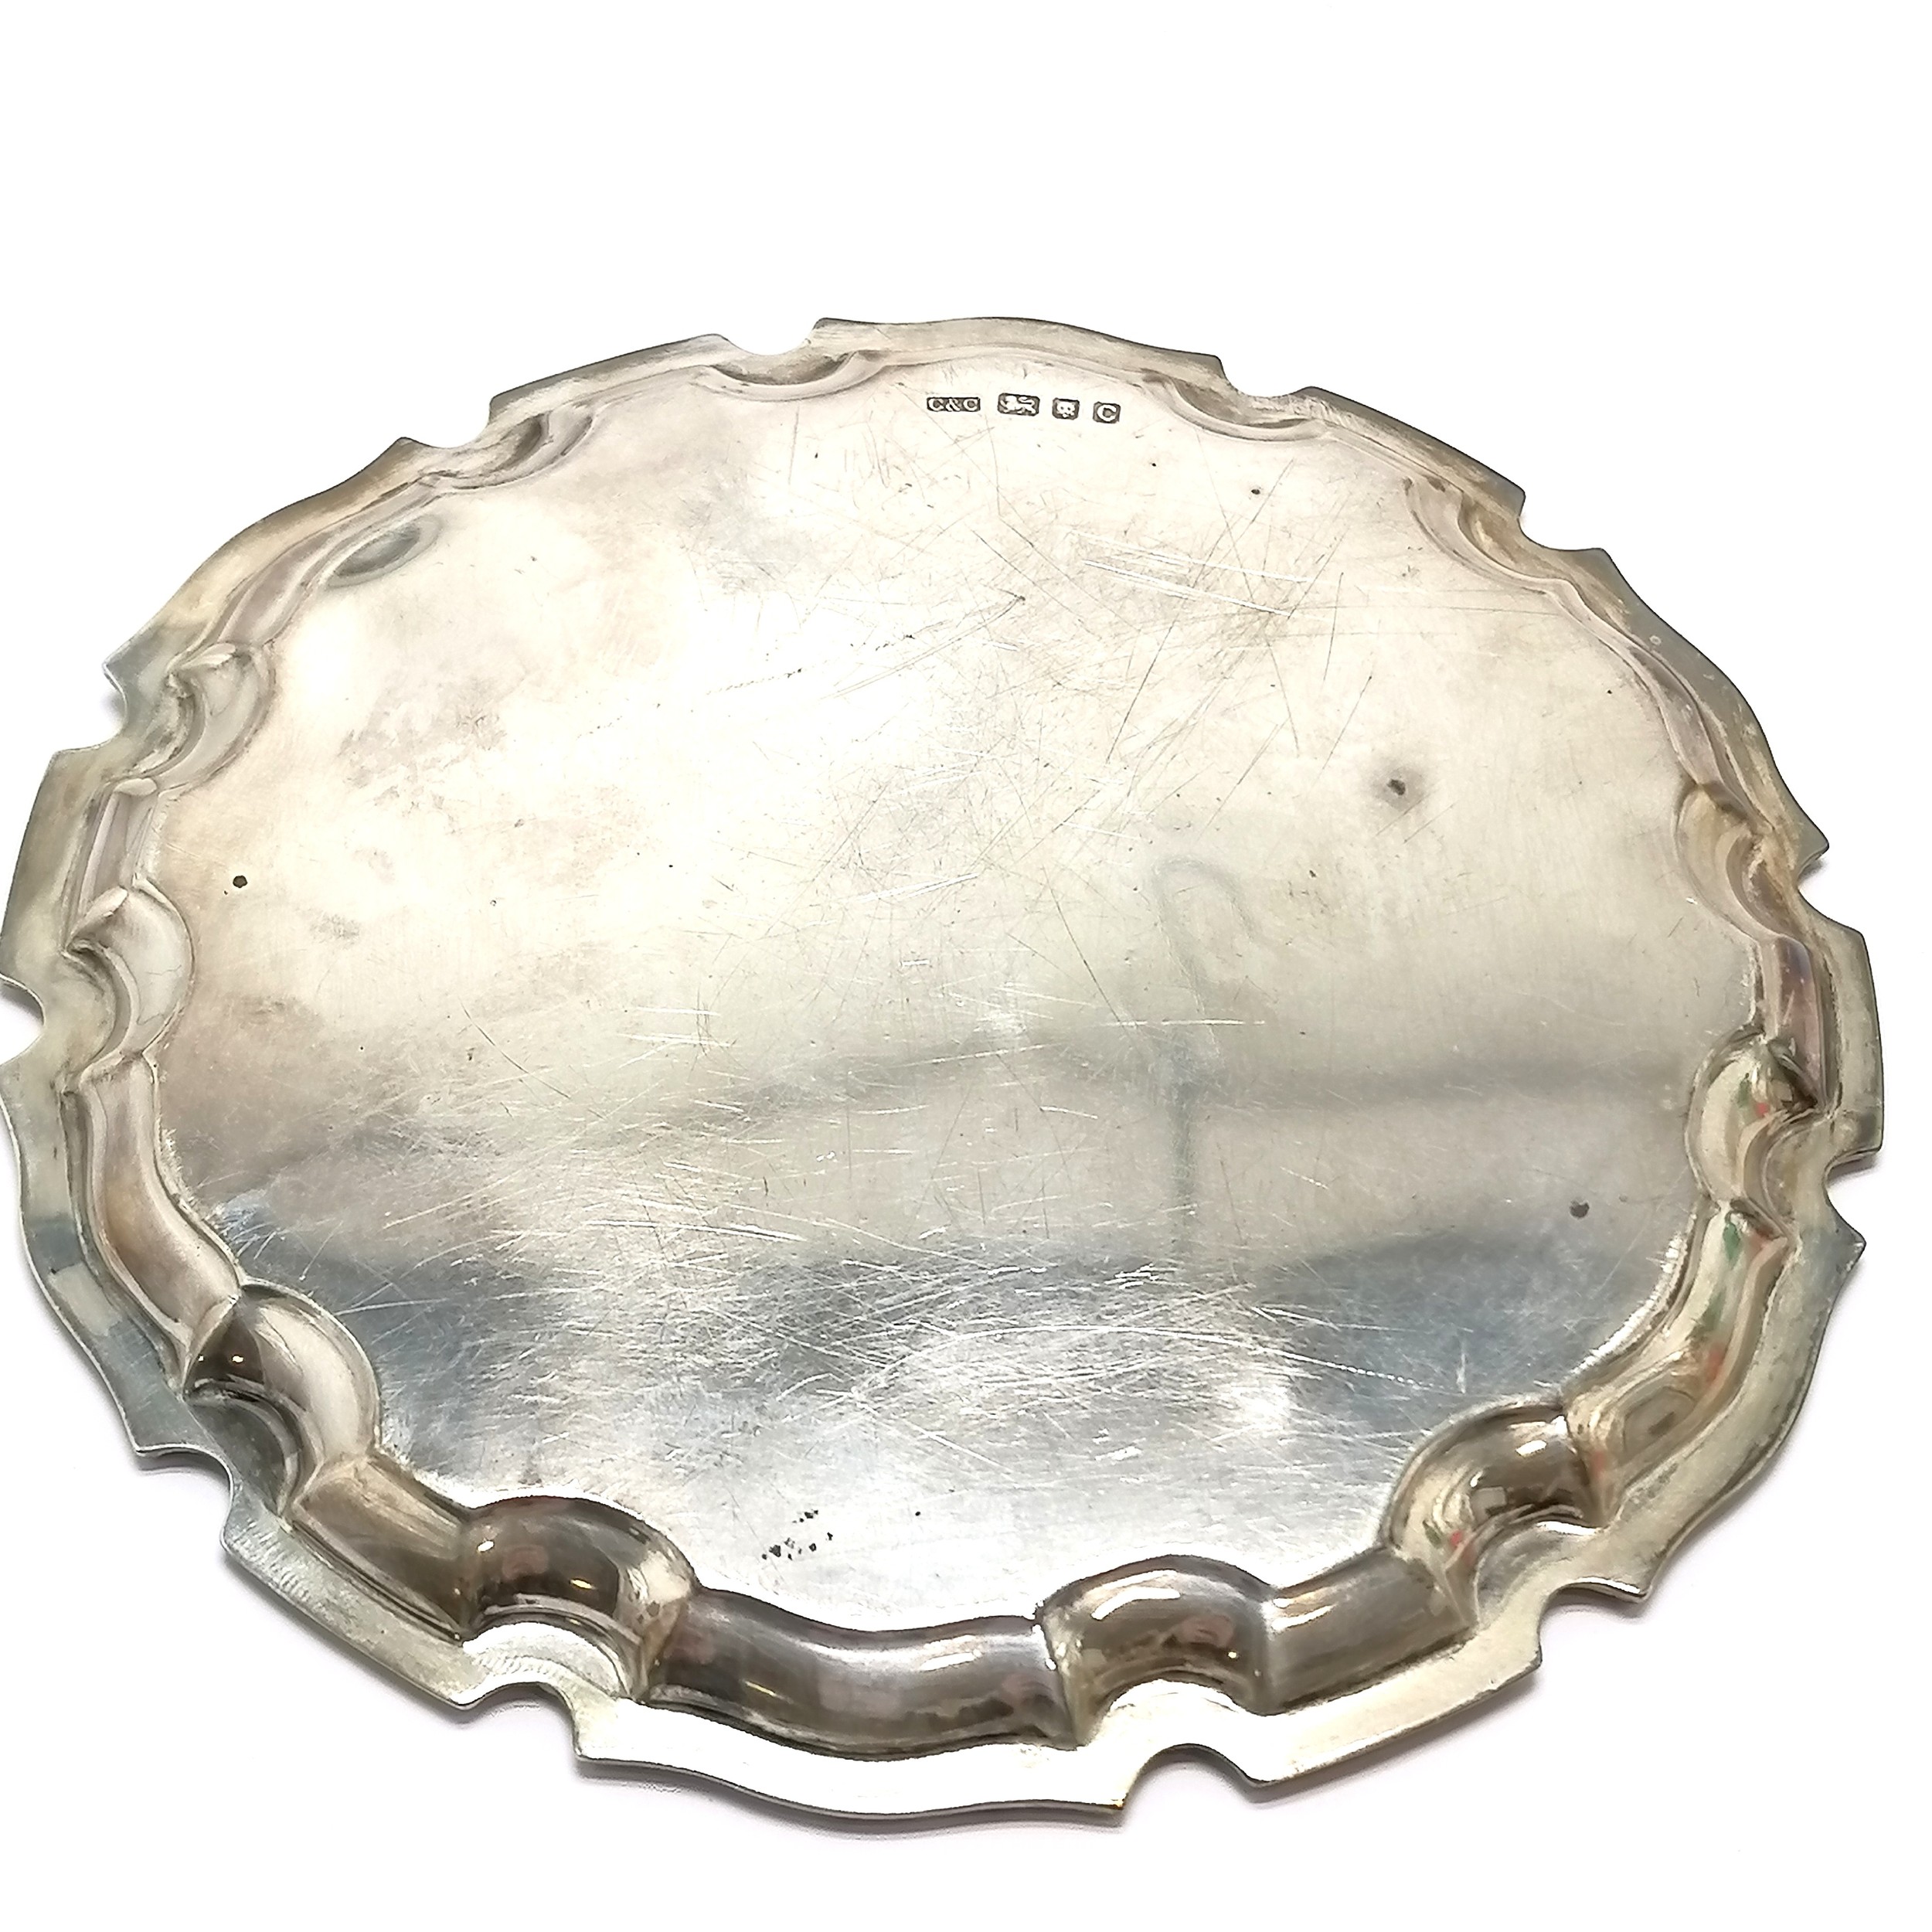 1938 silver salver by Cohen & Charles - 15.5cm diameter & 133g ~ slight dents - Image 3 of 3